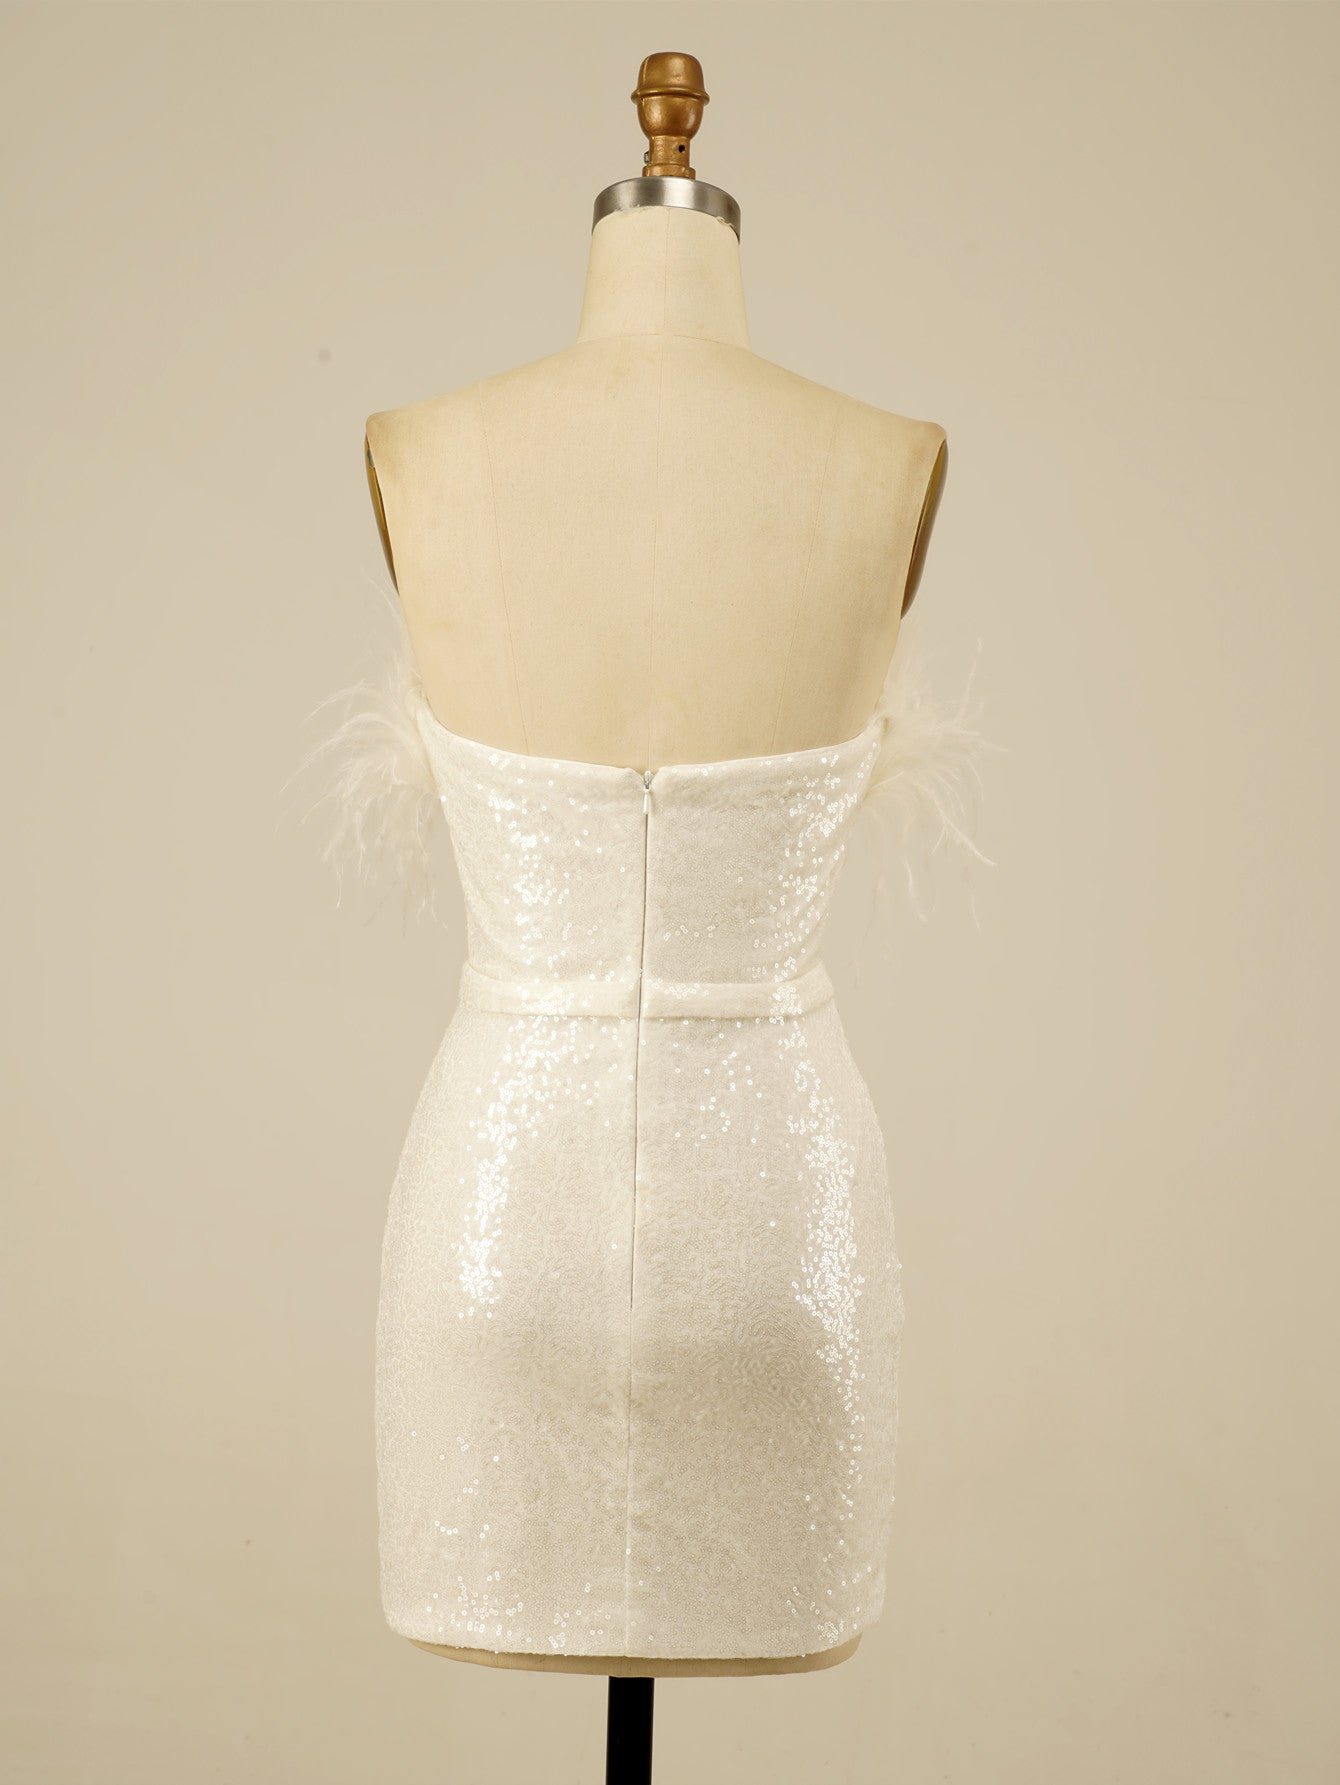 Sparkly Strapless White Homecoming Short Dress With Feathers